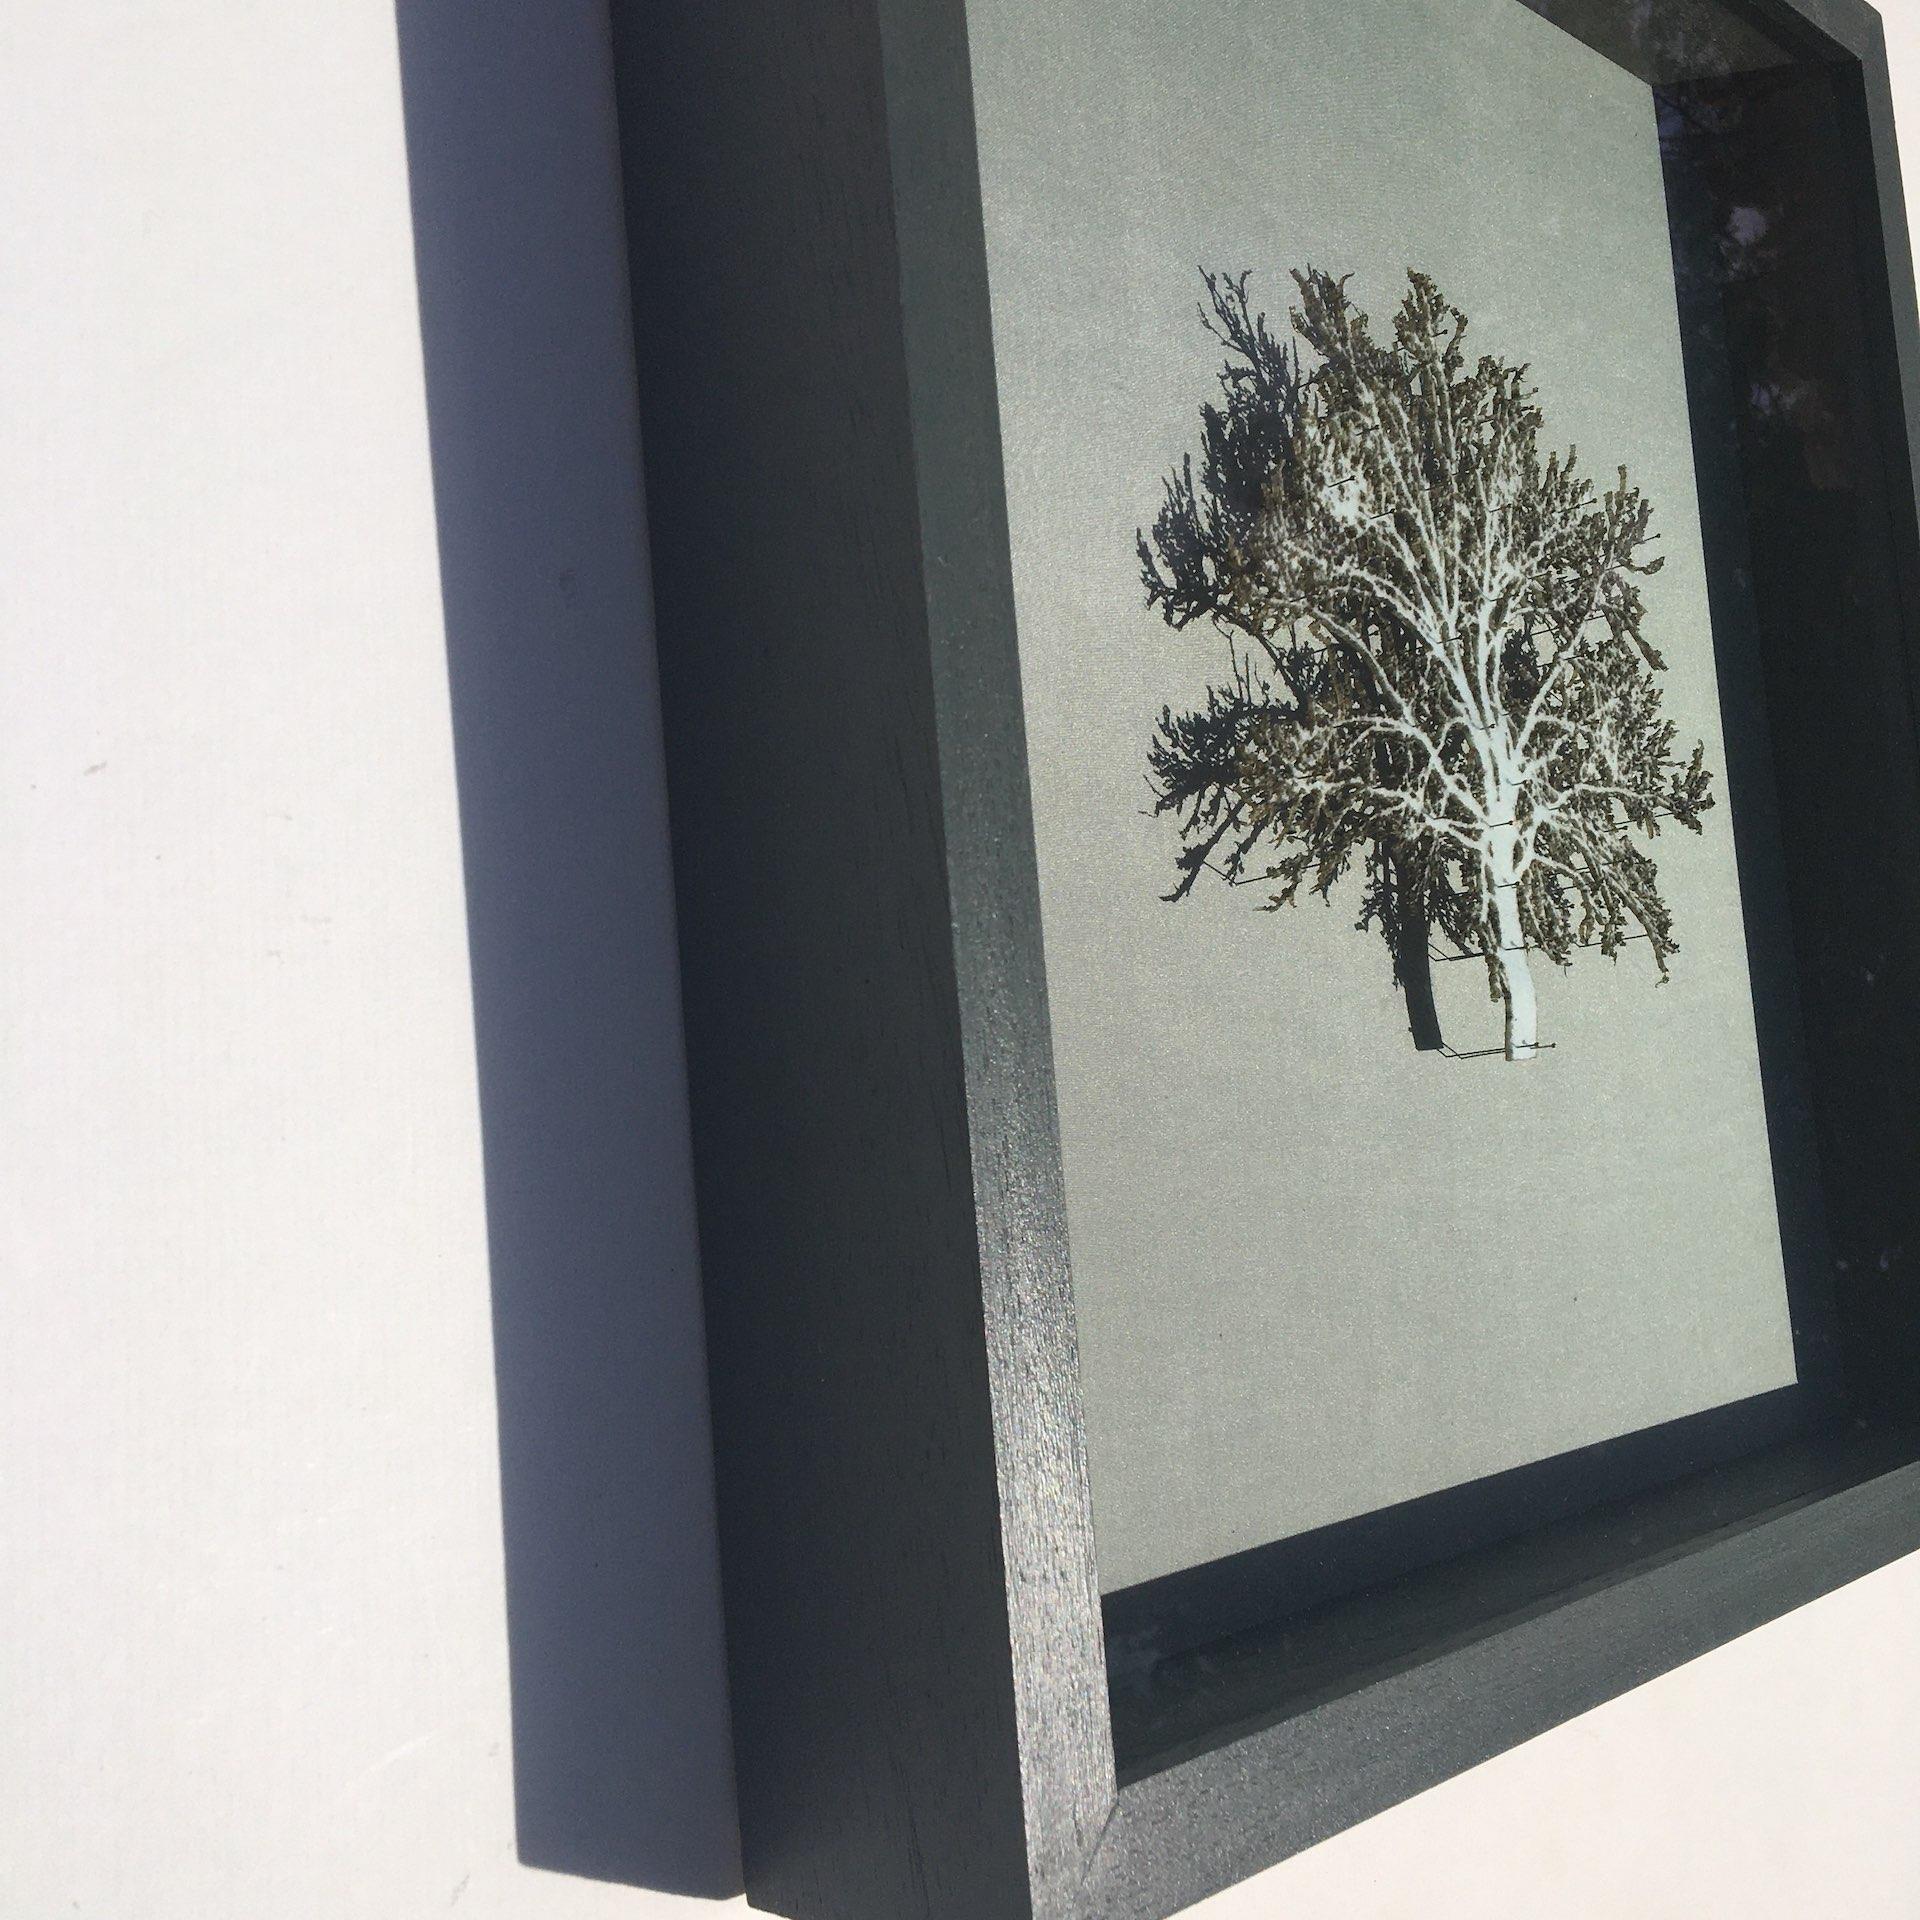 Emma Levine
White Oak
Laser Cut Paper Hawthorn Tree Attached with Pins
Etymology Pins, Silk and Paper
Framed Size: H 53cm x W 53cm x D 7cm
Framed in a Dark Grey Wood Effect Box Frame

White Oak is an original paper cut artwork by Emma Levine. The